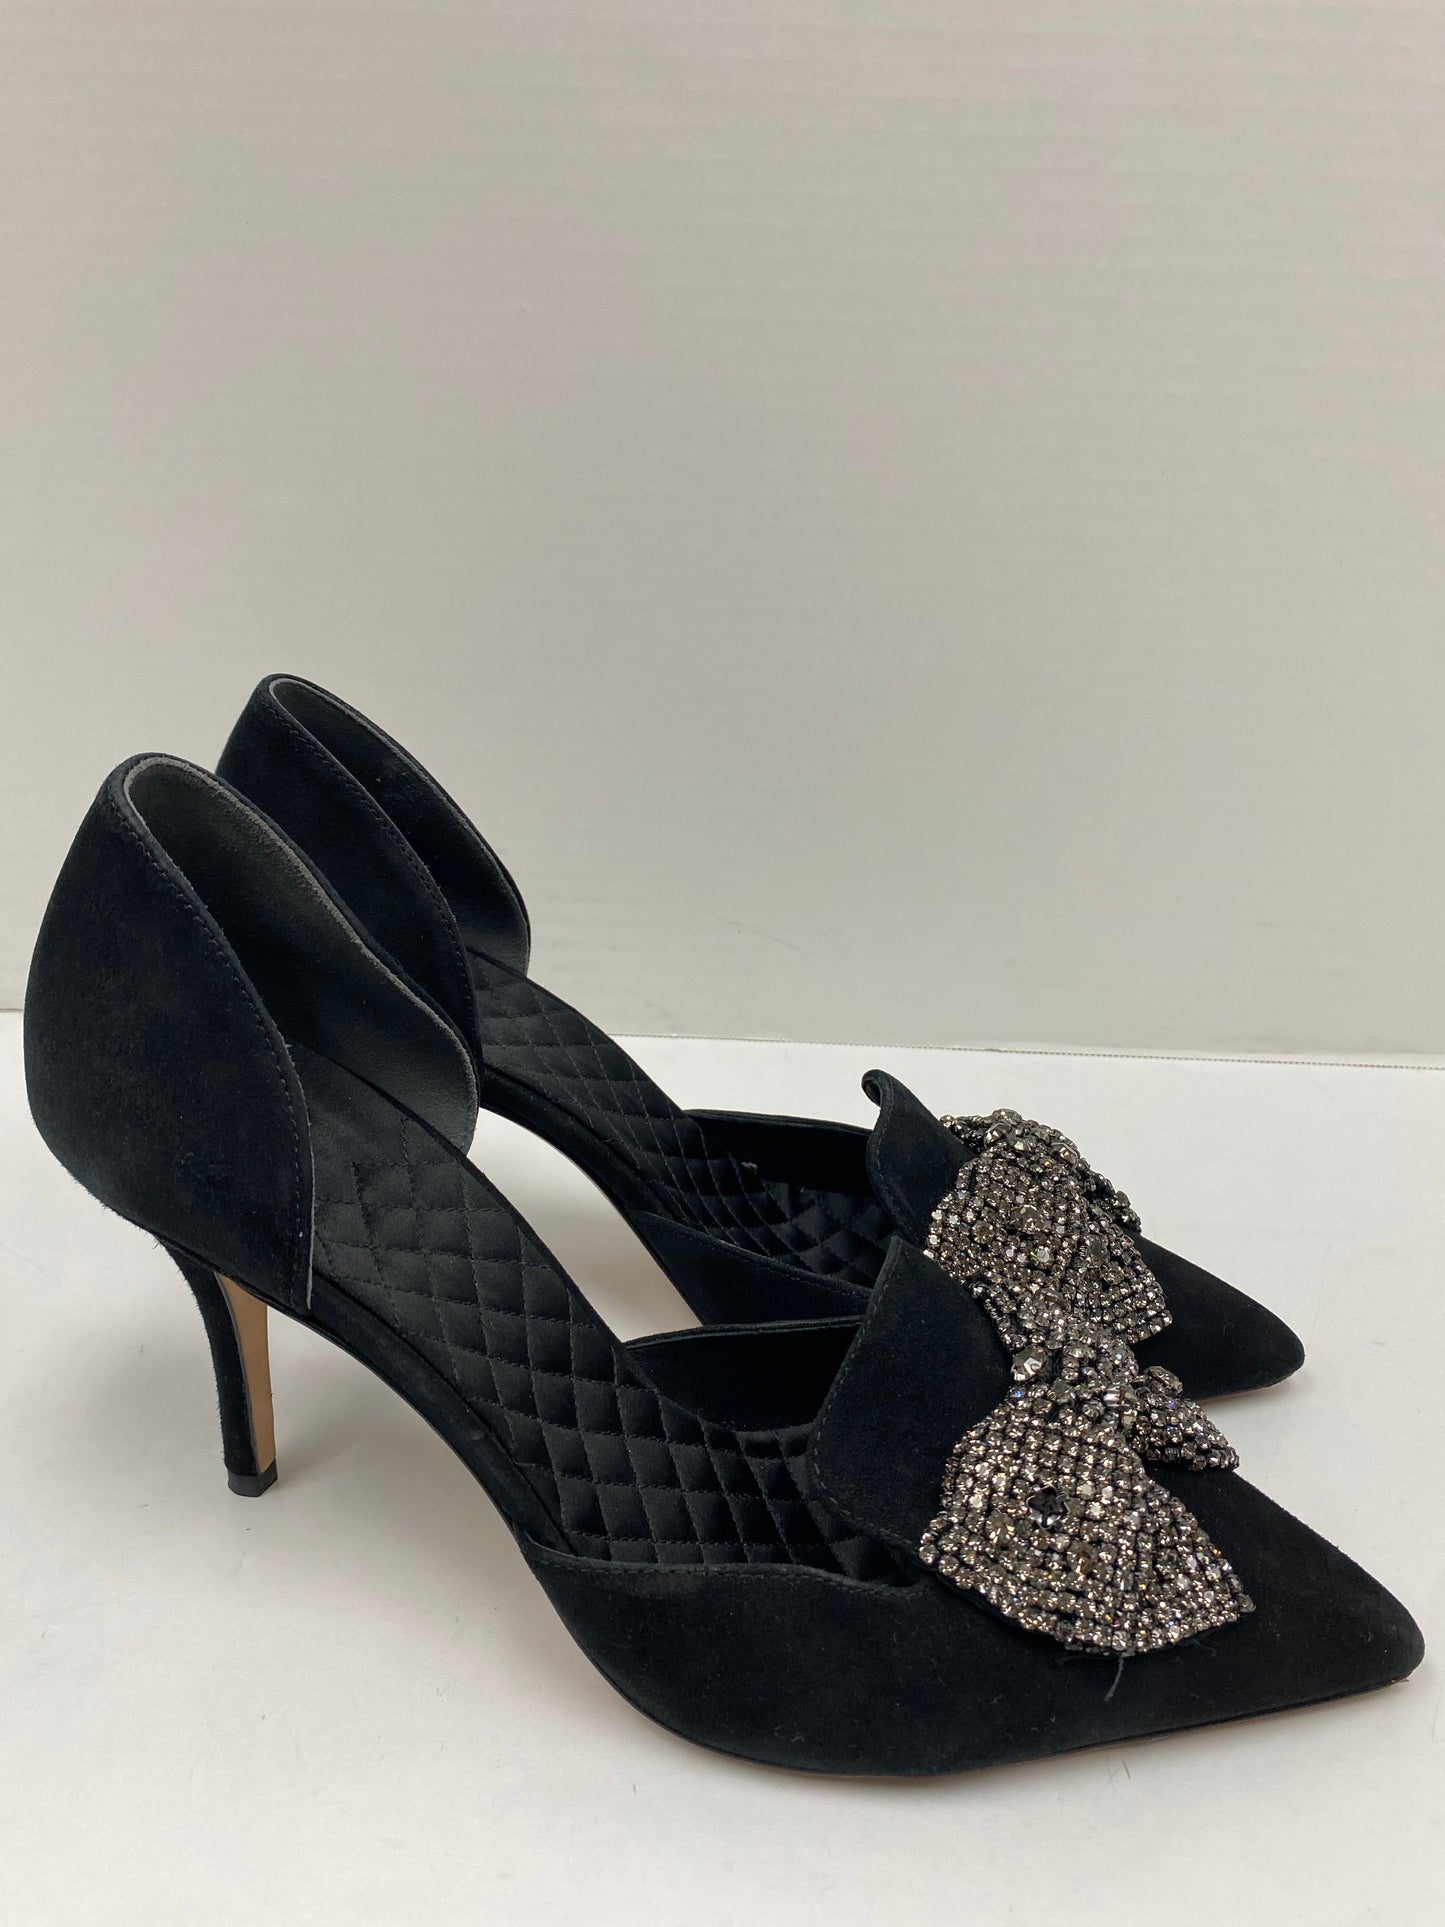 Shoes Heels Stiletto By Tory Burch  Size: 10